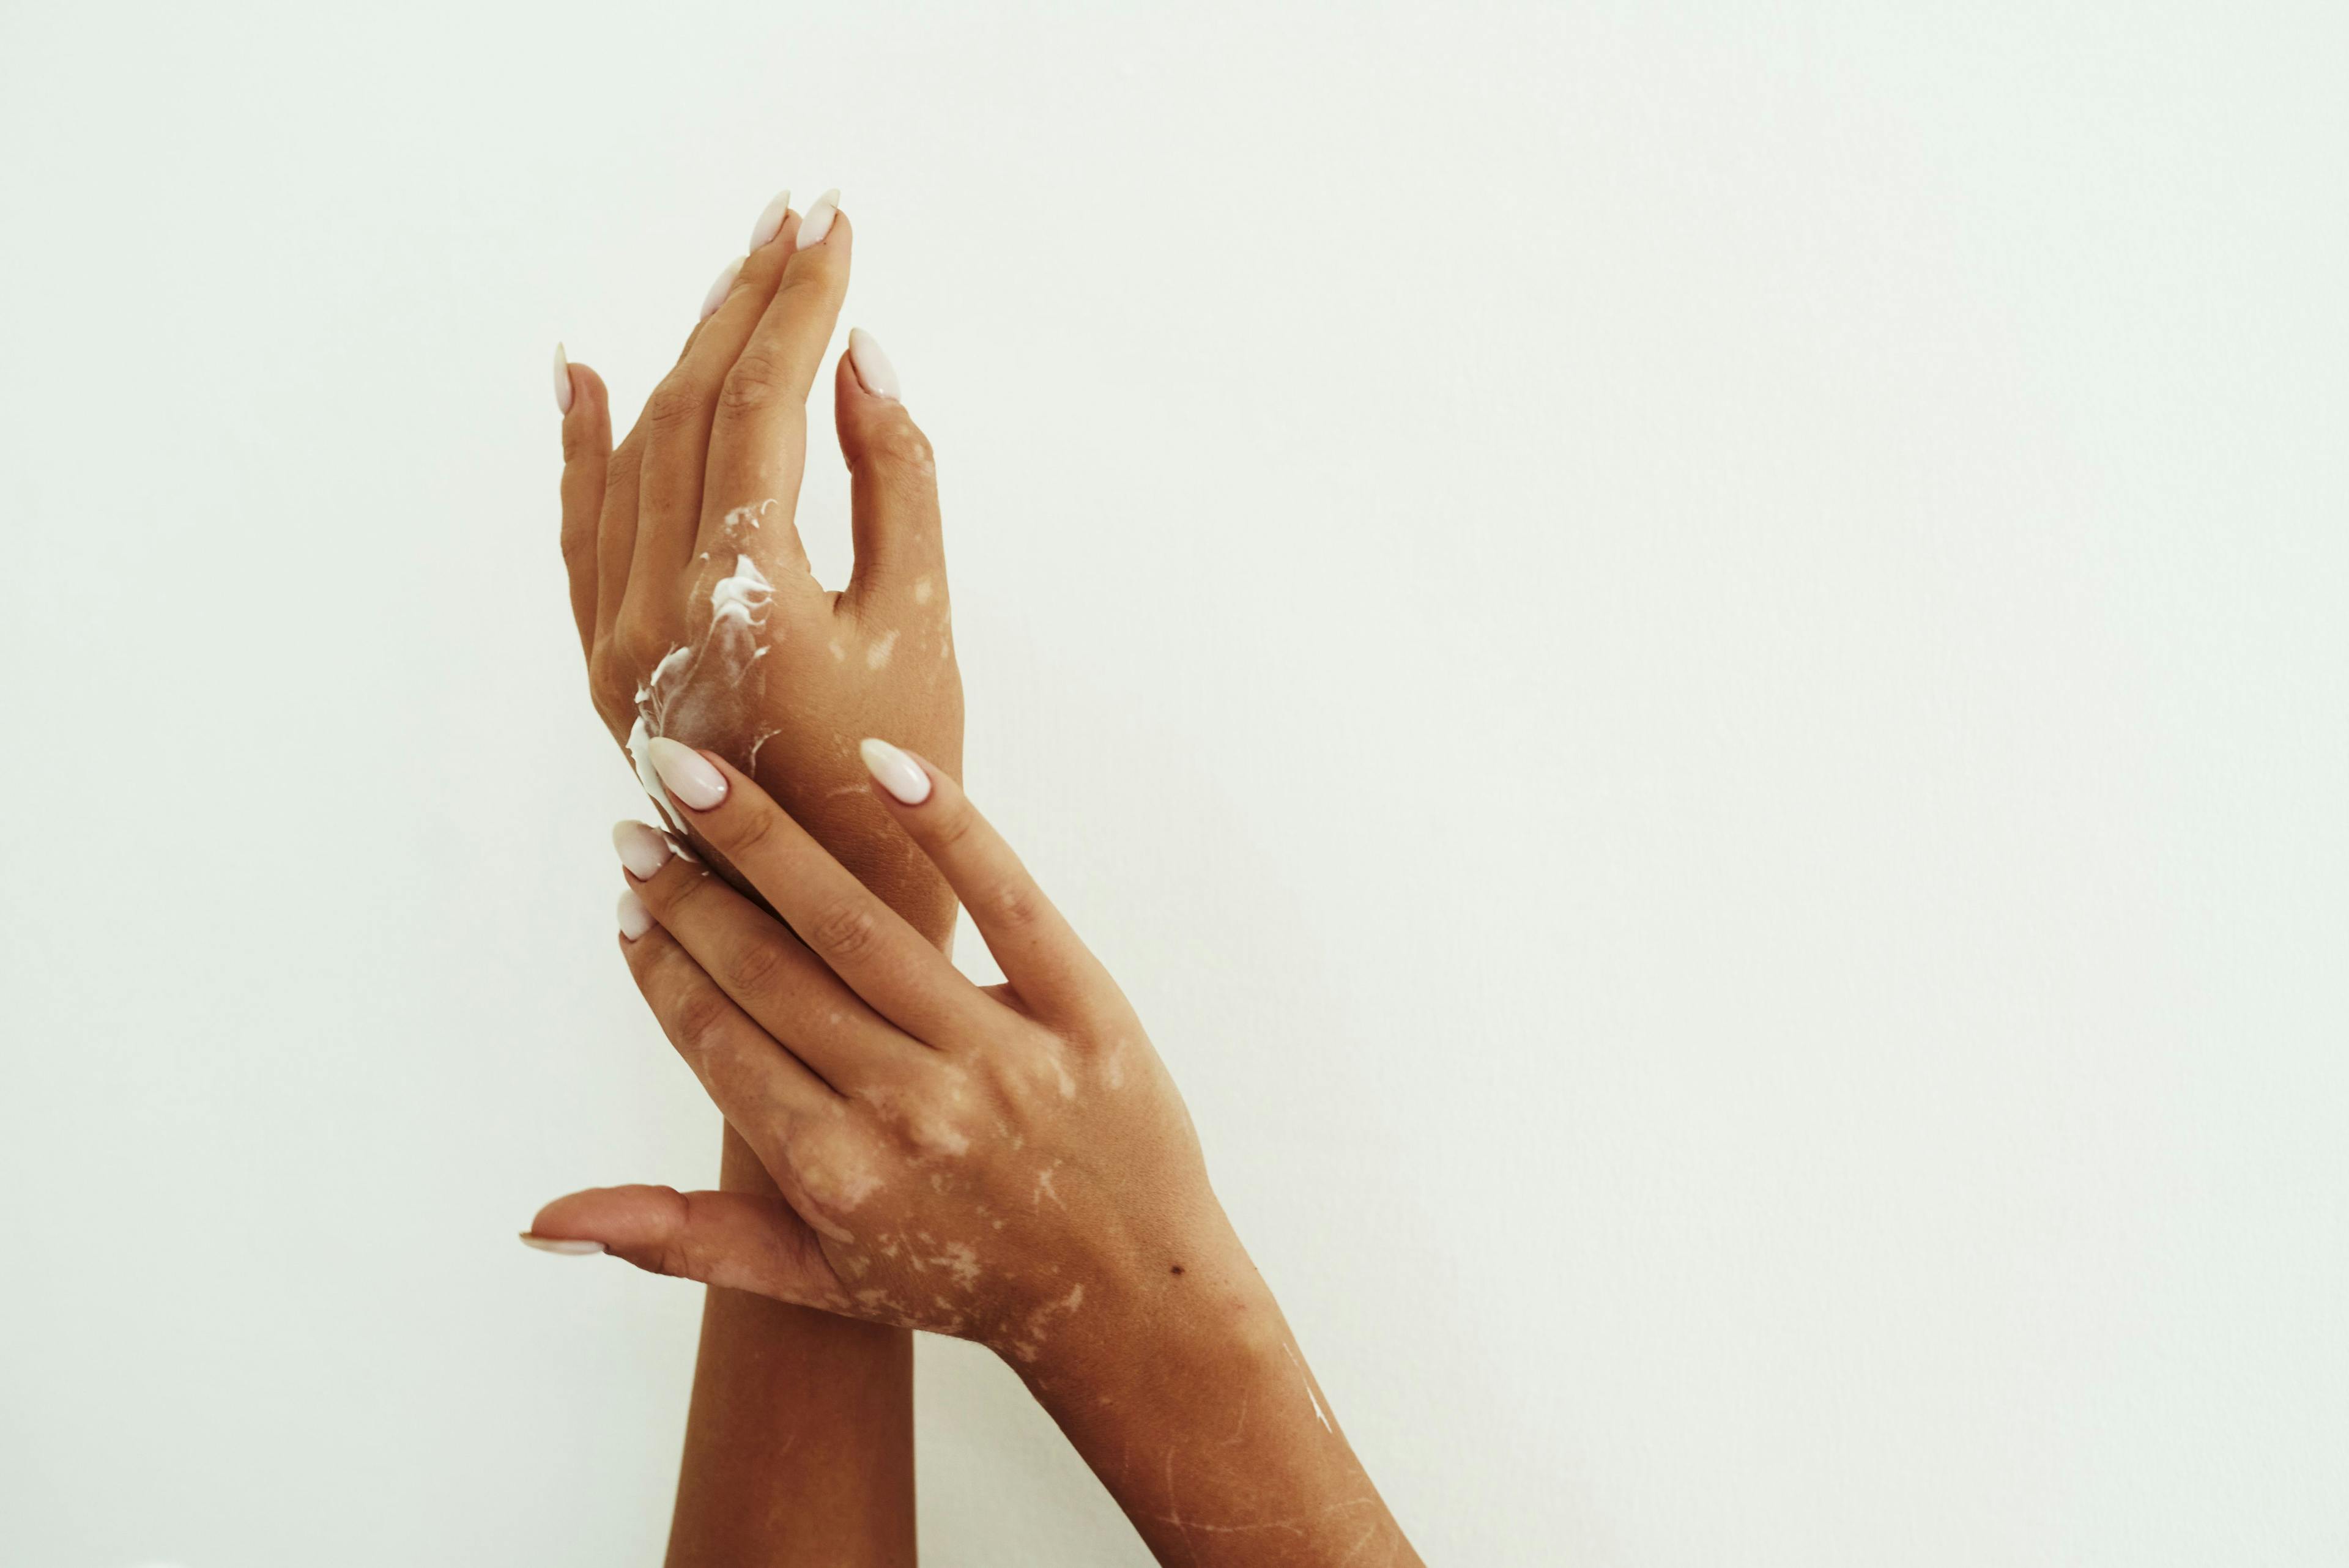 Review: Serum Concentrations of Vitamin D, Vitamin E, and Zinc Lower in Patients With Vitiligo